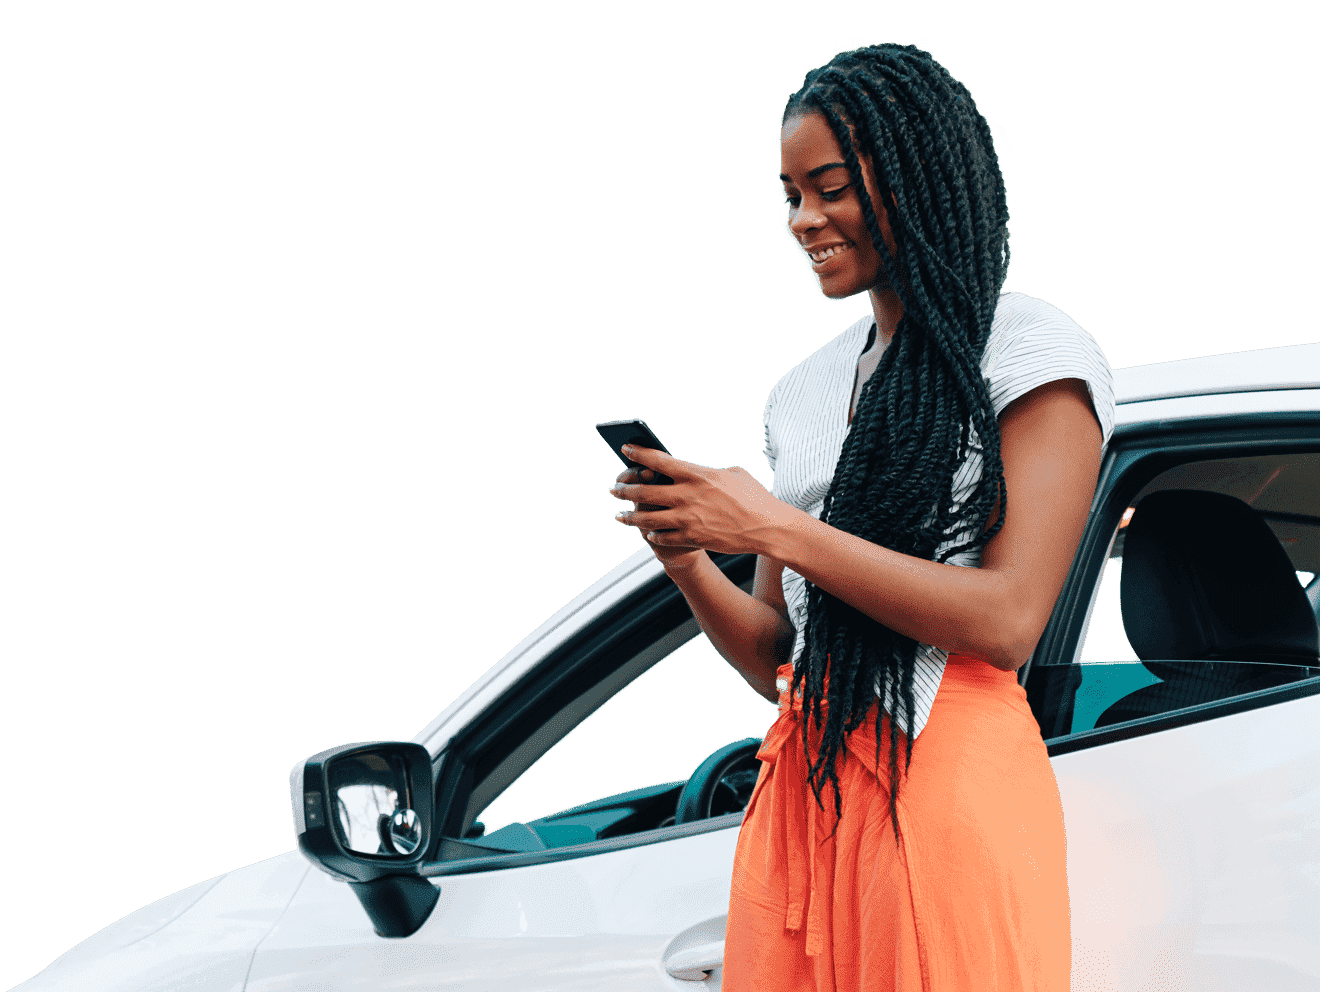 A lady with dreadlocks looking at mobile